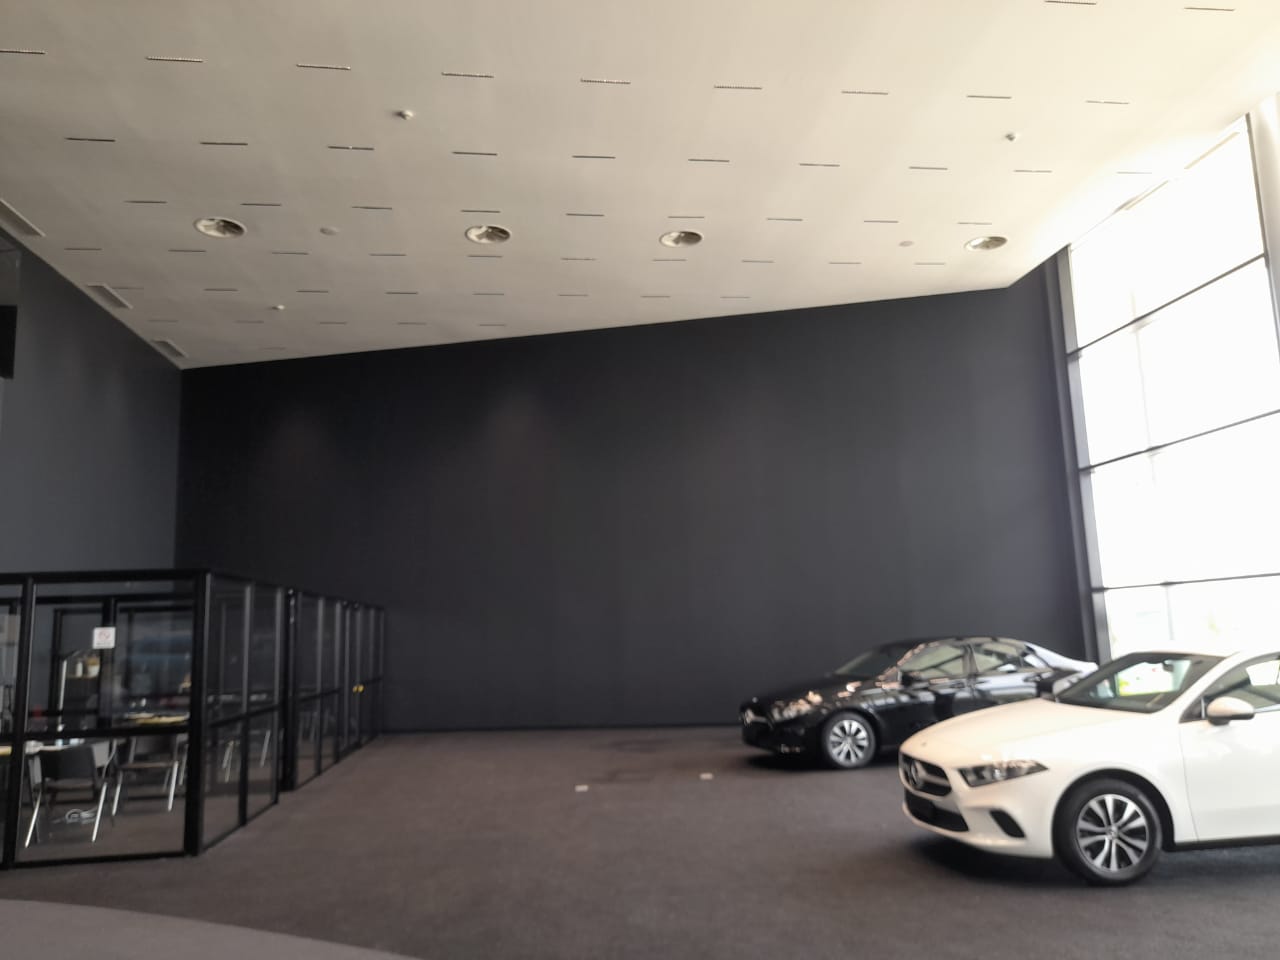 MERCEDES SHOWROOMWhatsApp Image 2021-05-27 at 14.56.12 (1)